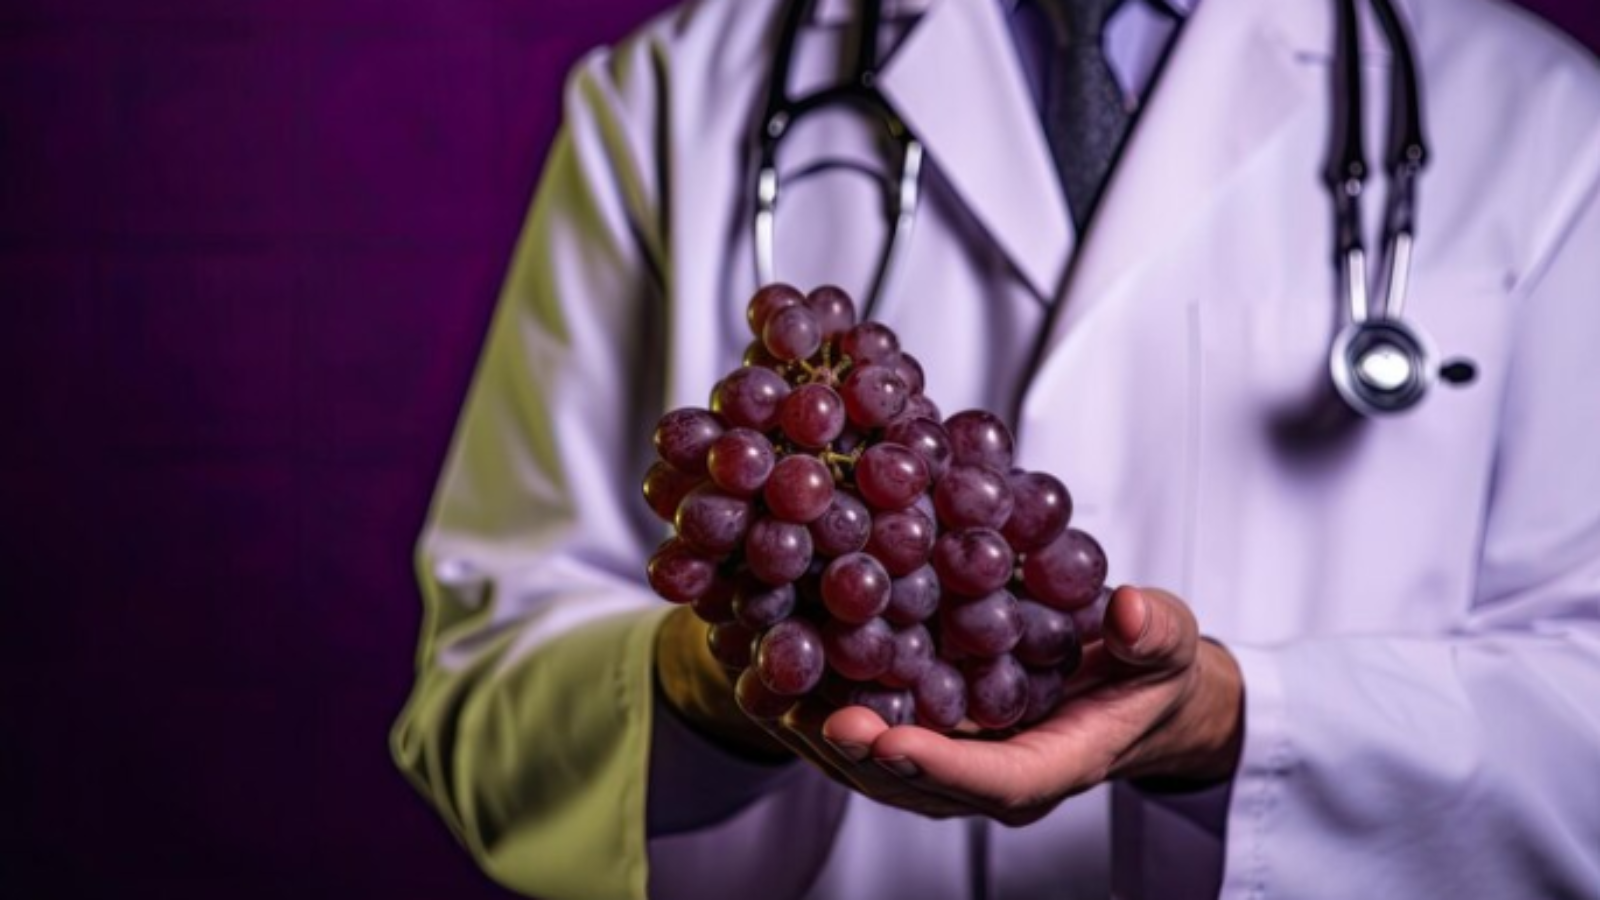 Premium-AI-Image-Knowledgeable-doctor-holds-plump-red-grapes